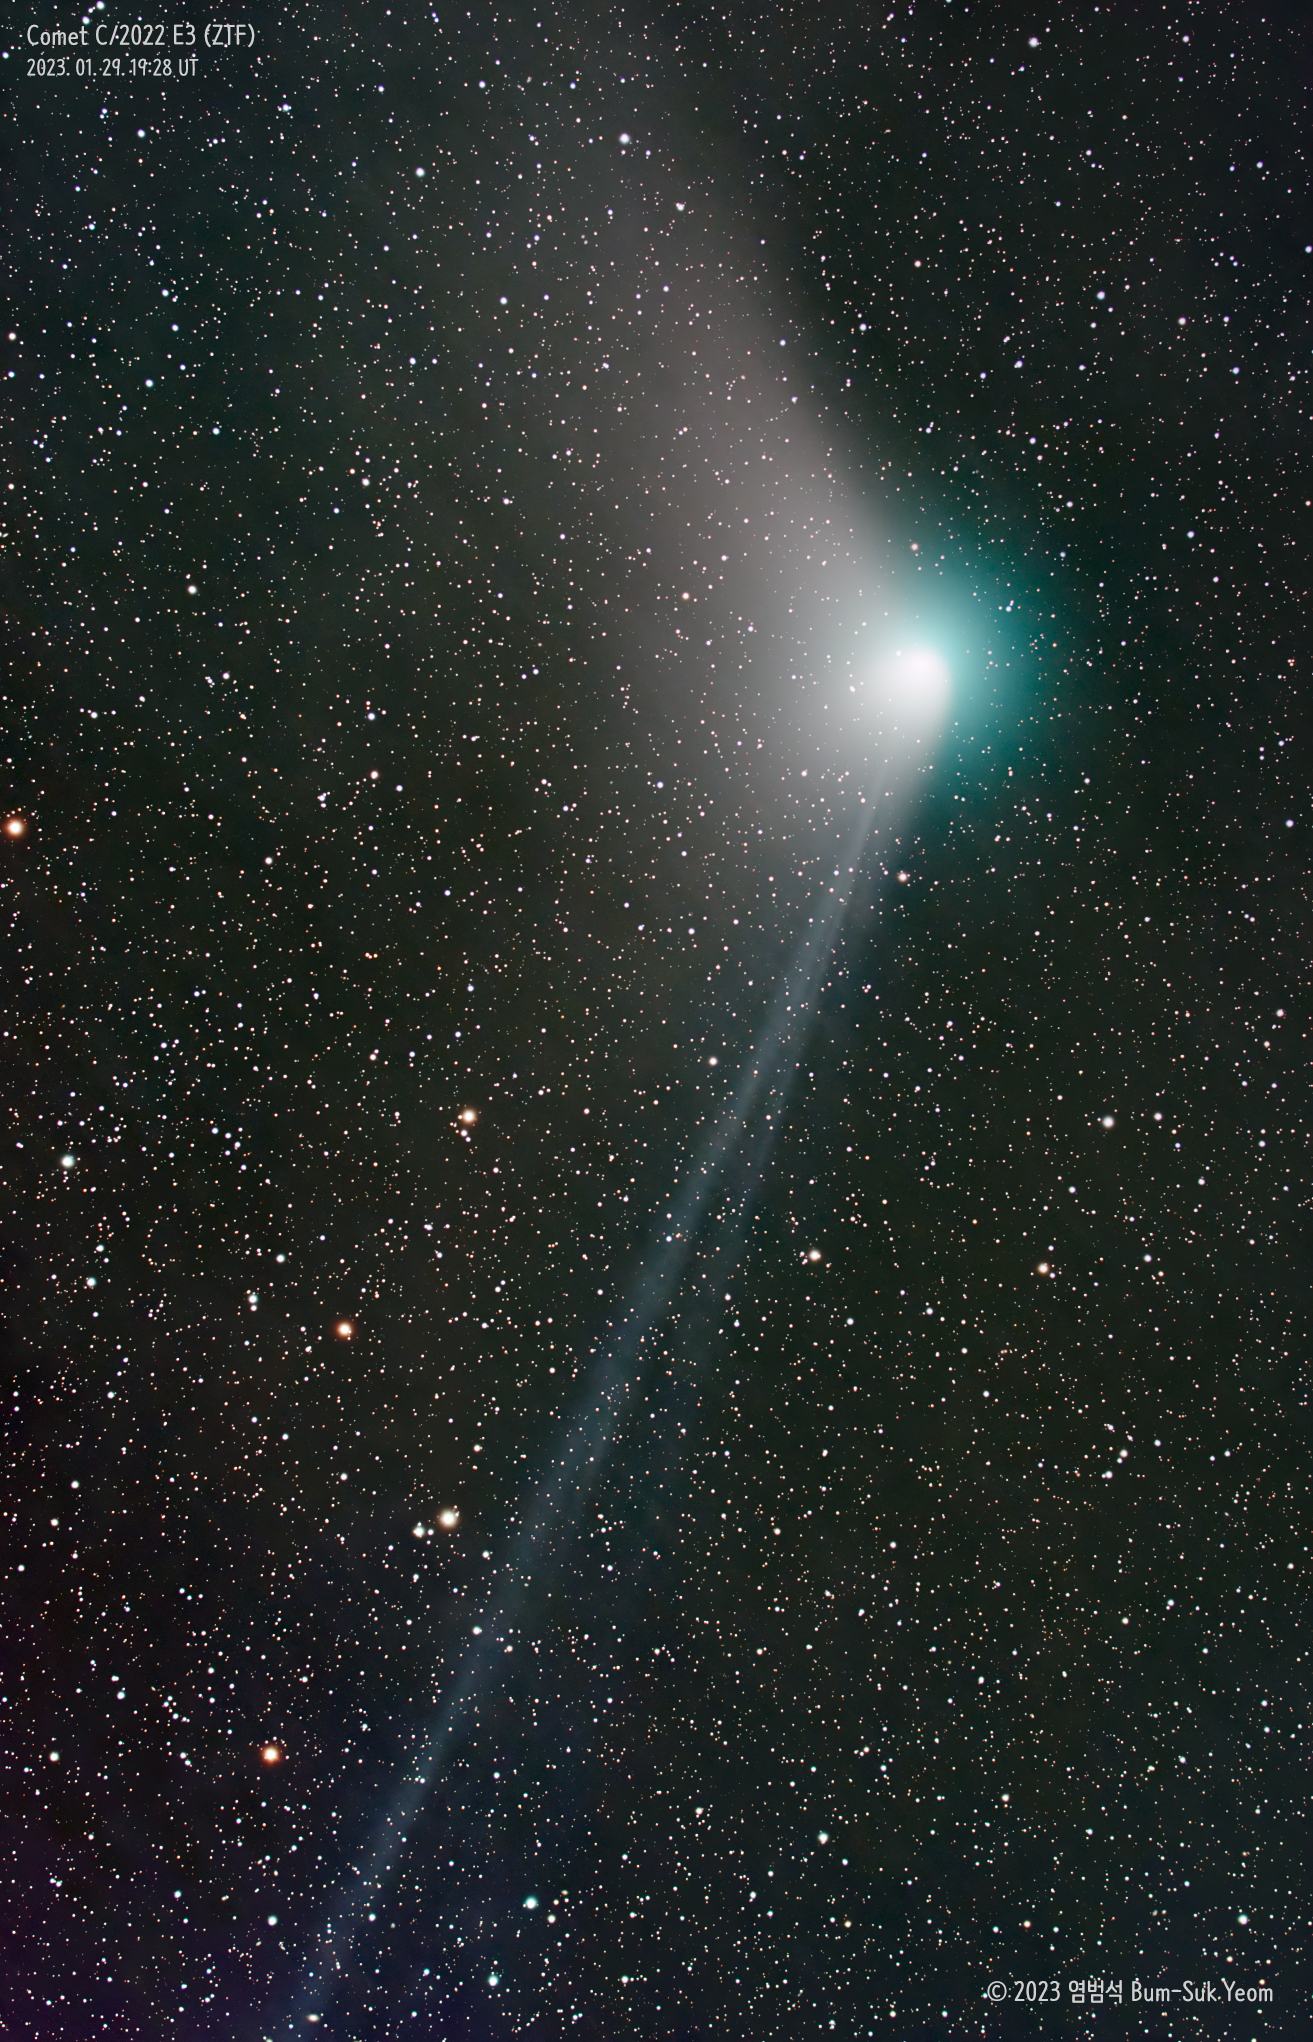 comet_c2022e3_ztf_230130_web_rot_bsyeom